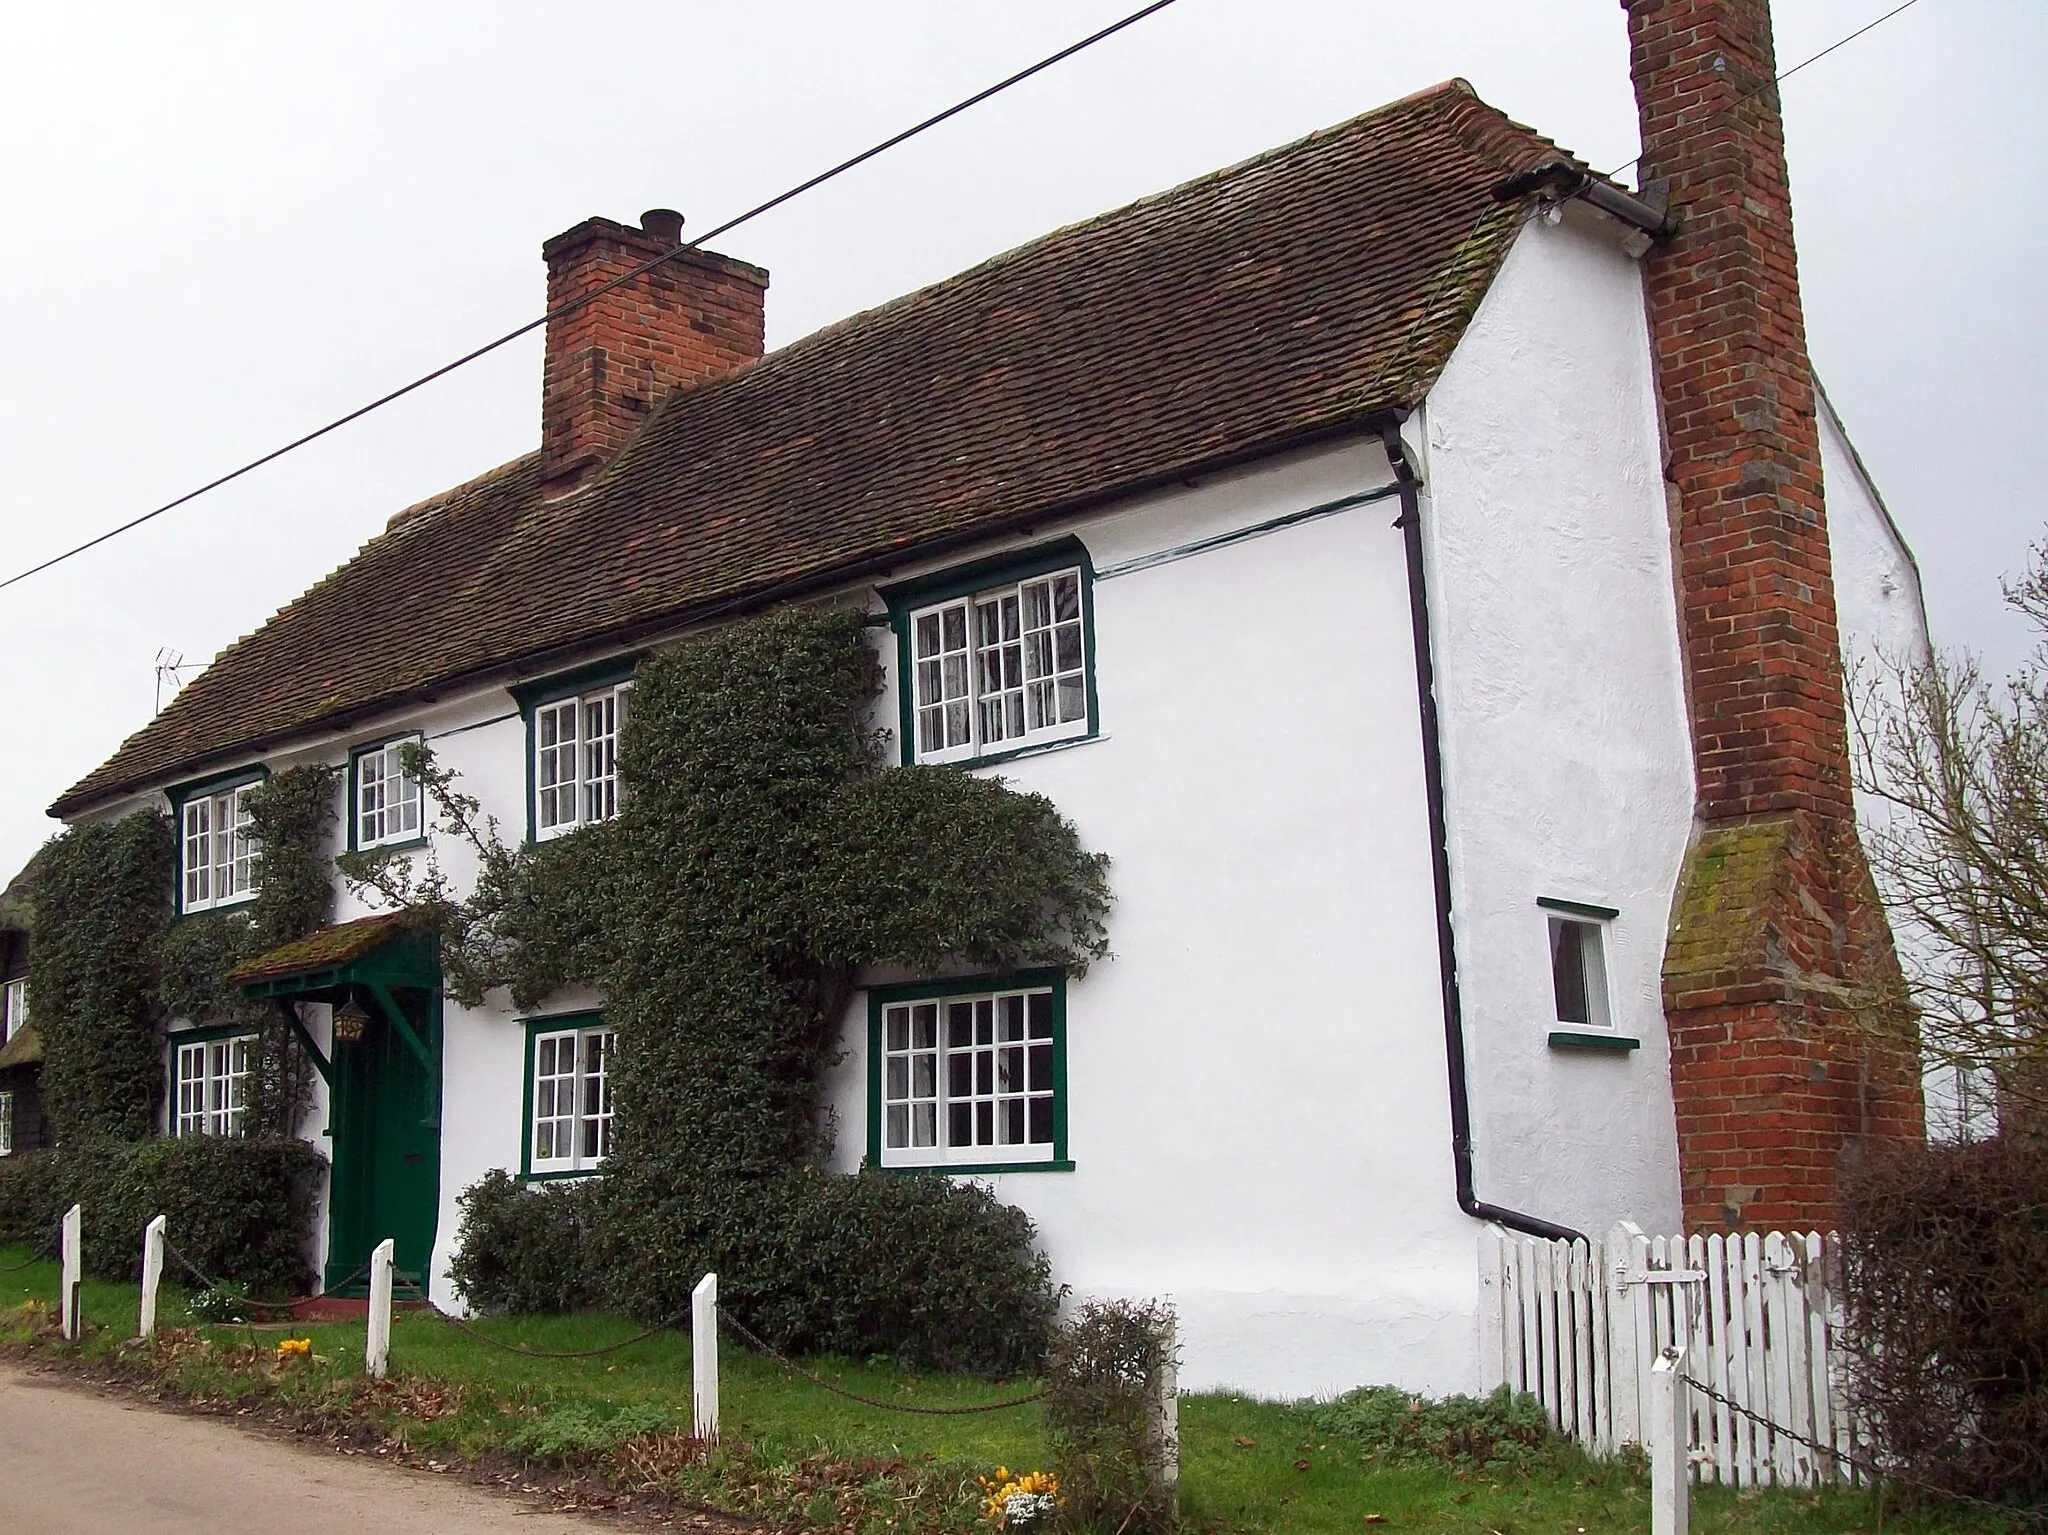 Photo showing: Steen Cottage, Nasty, Hertfordshire, 25 February 2011. A Grade II listed building built in the 16th or early 17th century.[1]